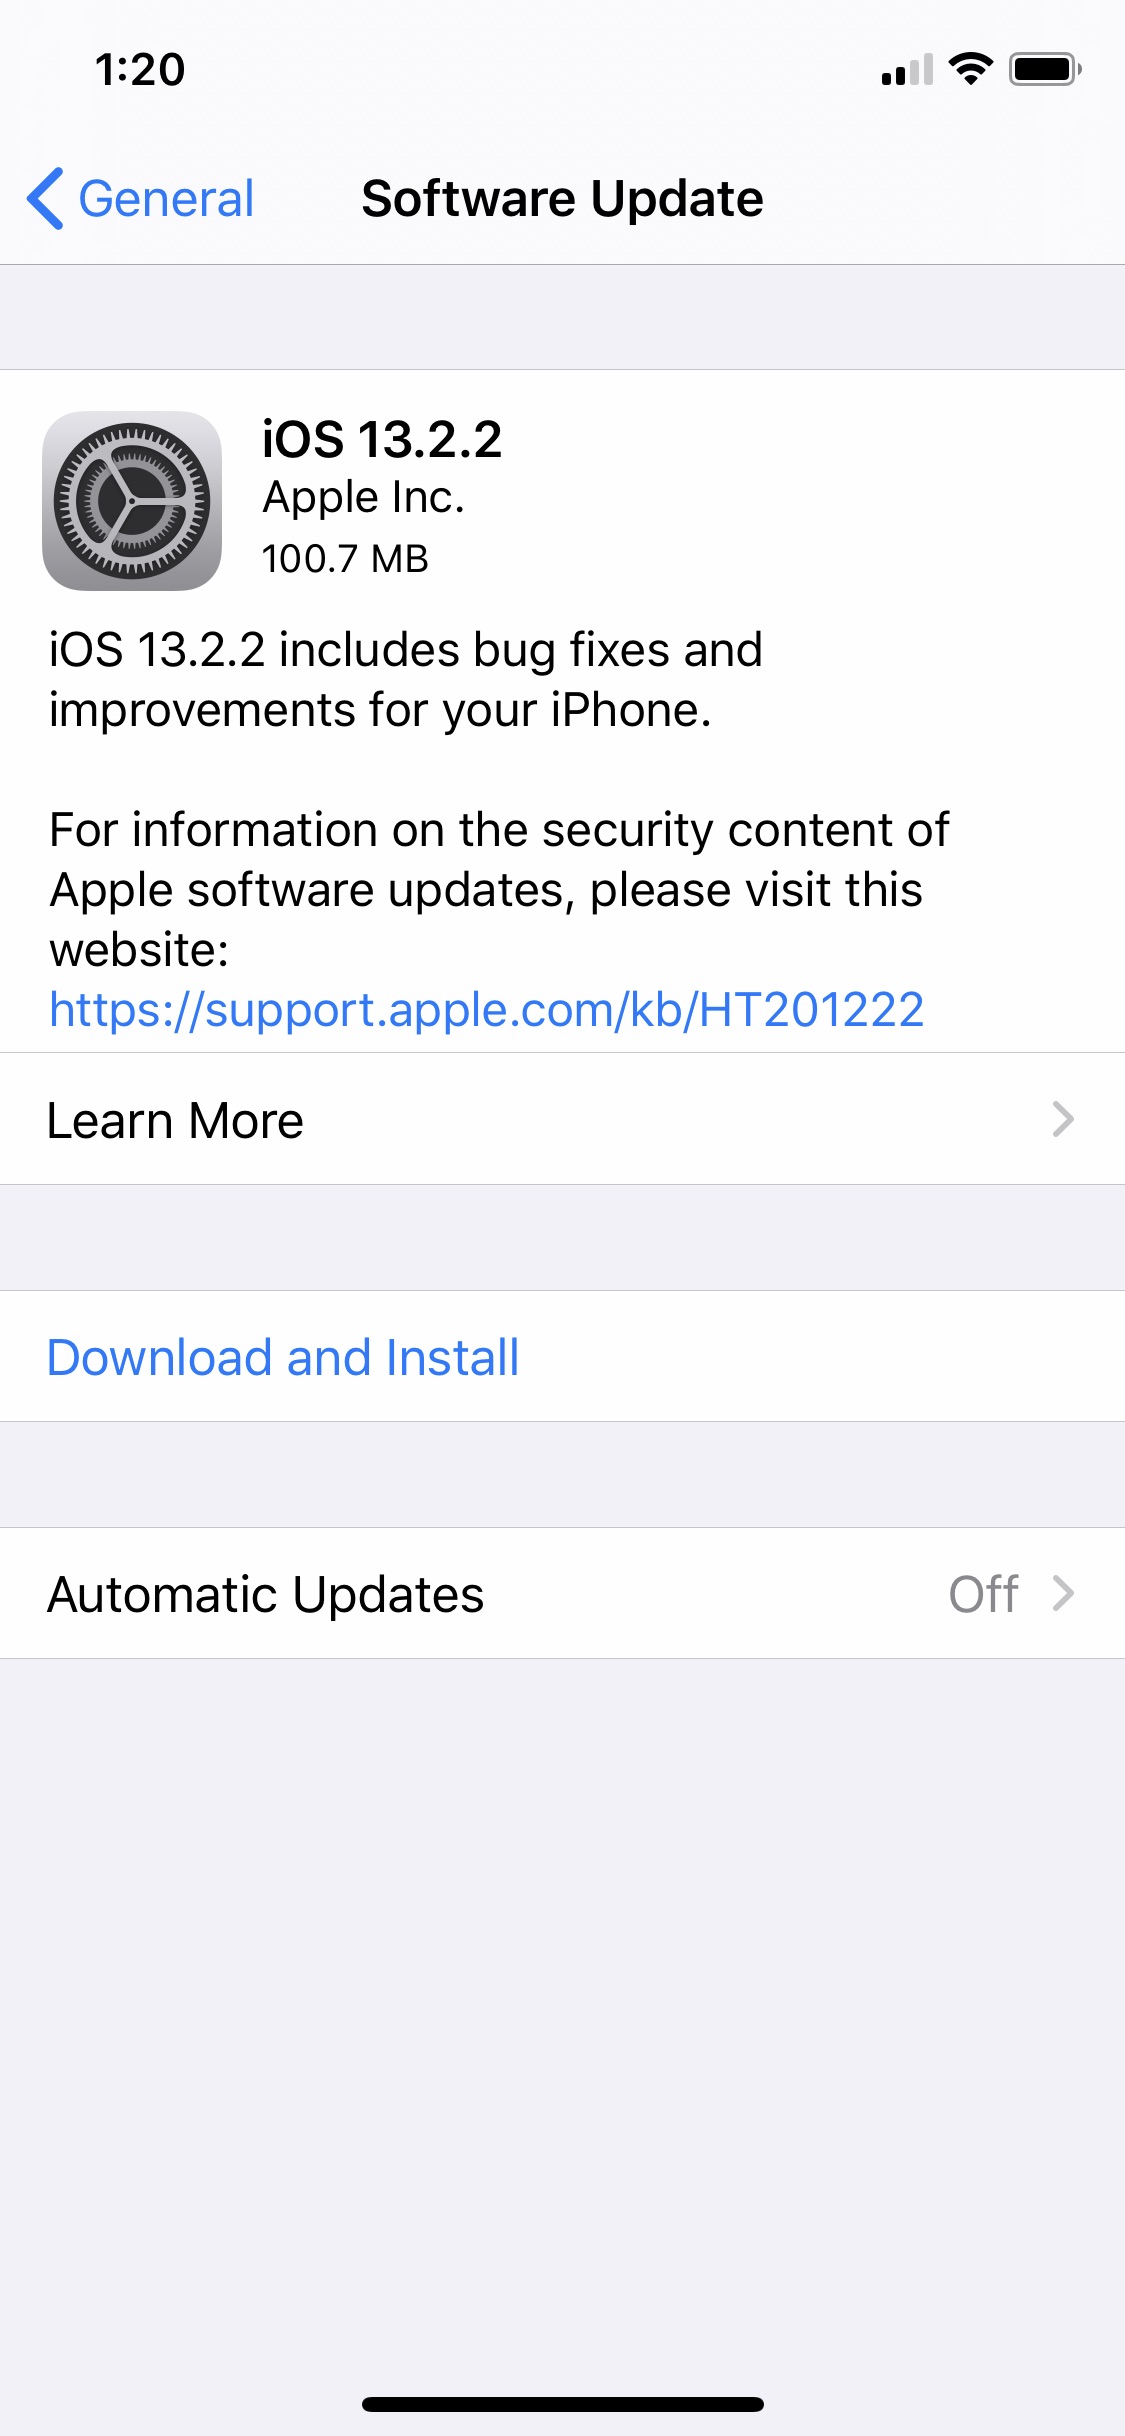 Apple Releases iOS 13.2.2 to Fix Issue That Caused Backgrounded Apps to Unexpectedly Quit [Download]